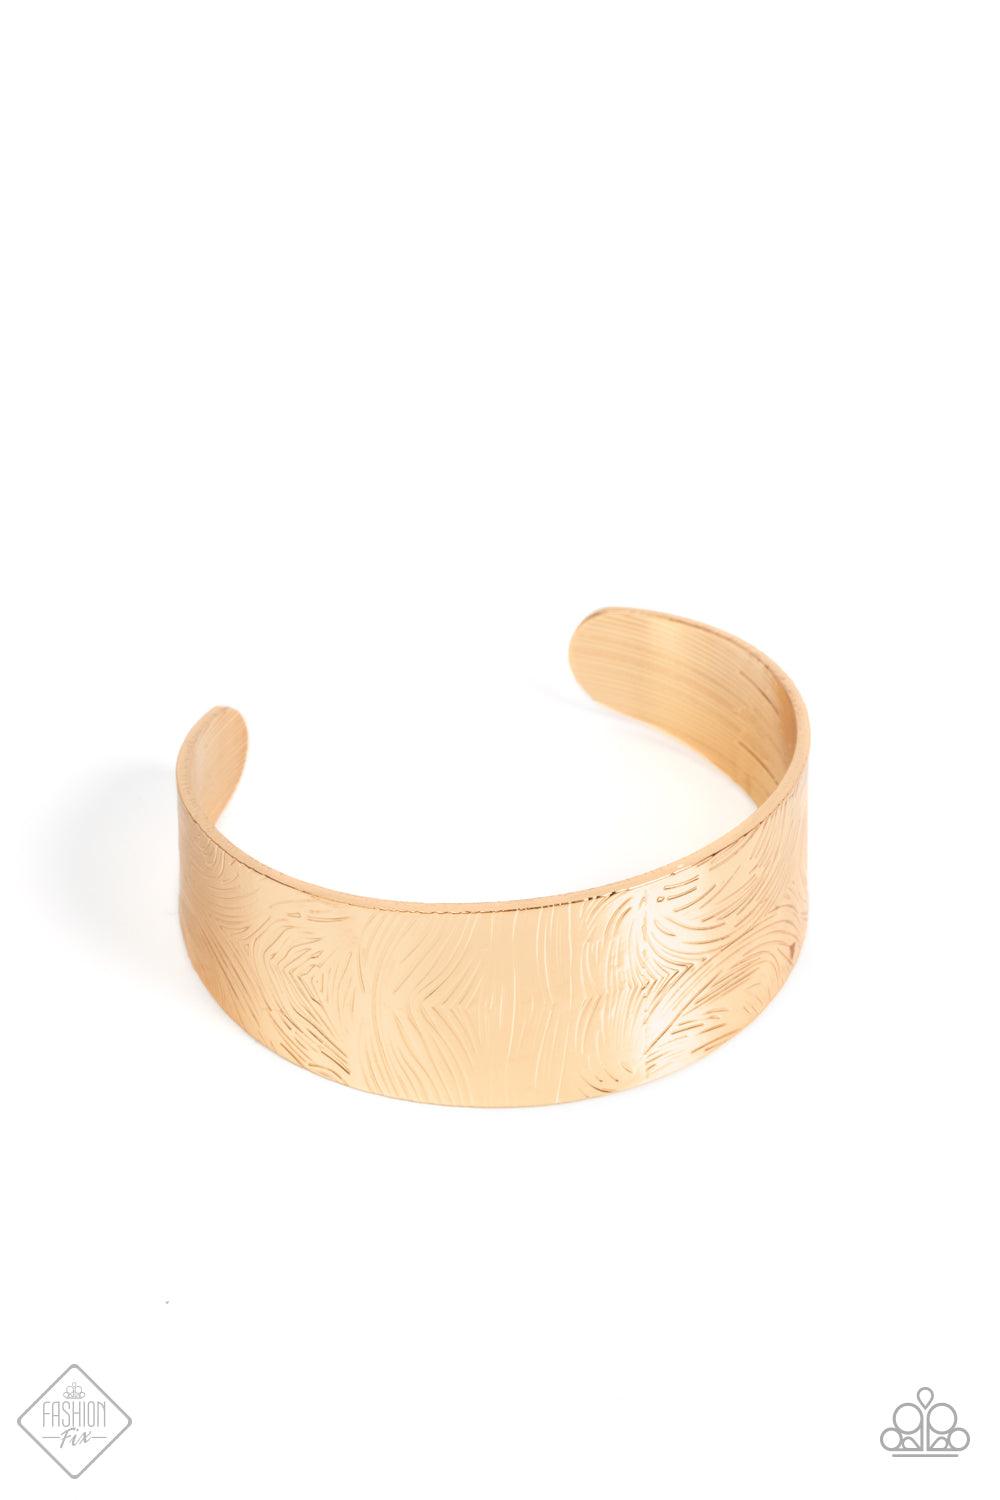 Paparazzi Accessories Coolly Curved - Gold A thick gold band is swirled with rippling textures as it wraps around the wrist into a bold cuff design. Sold as one individual bracelet. Jewelry